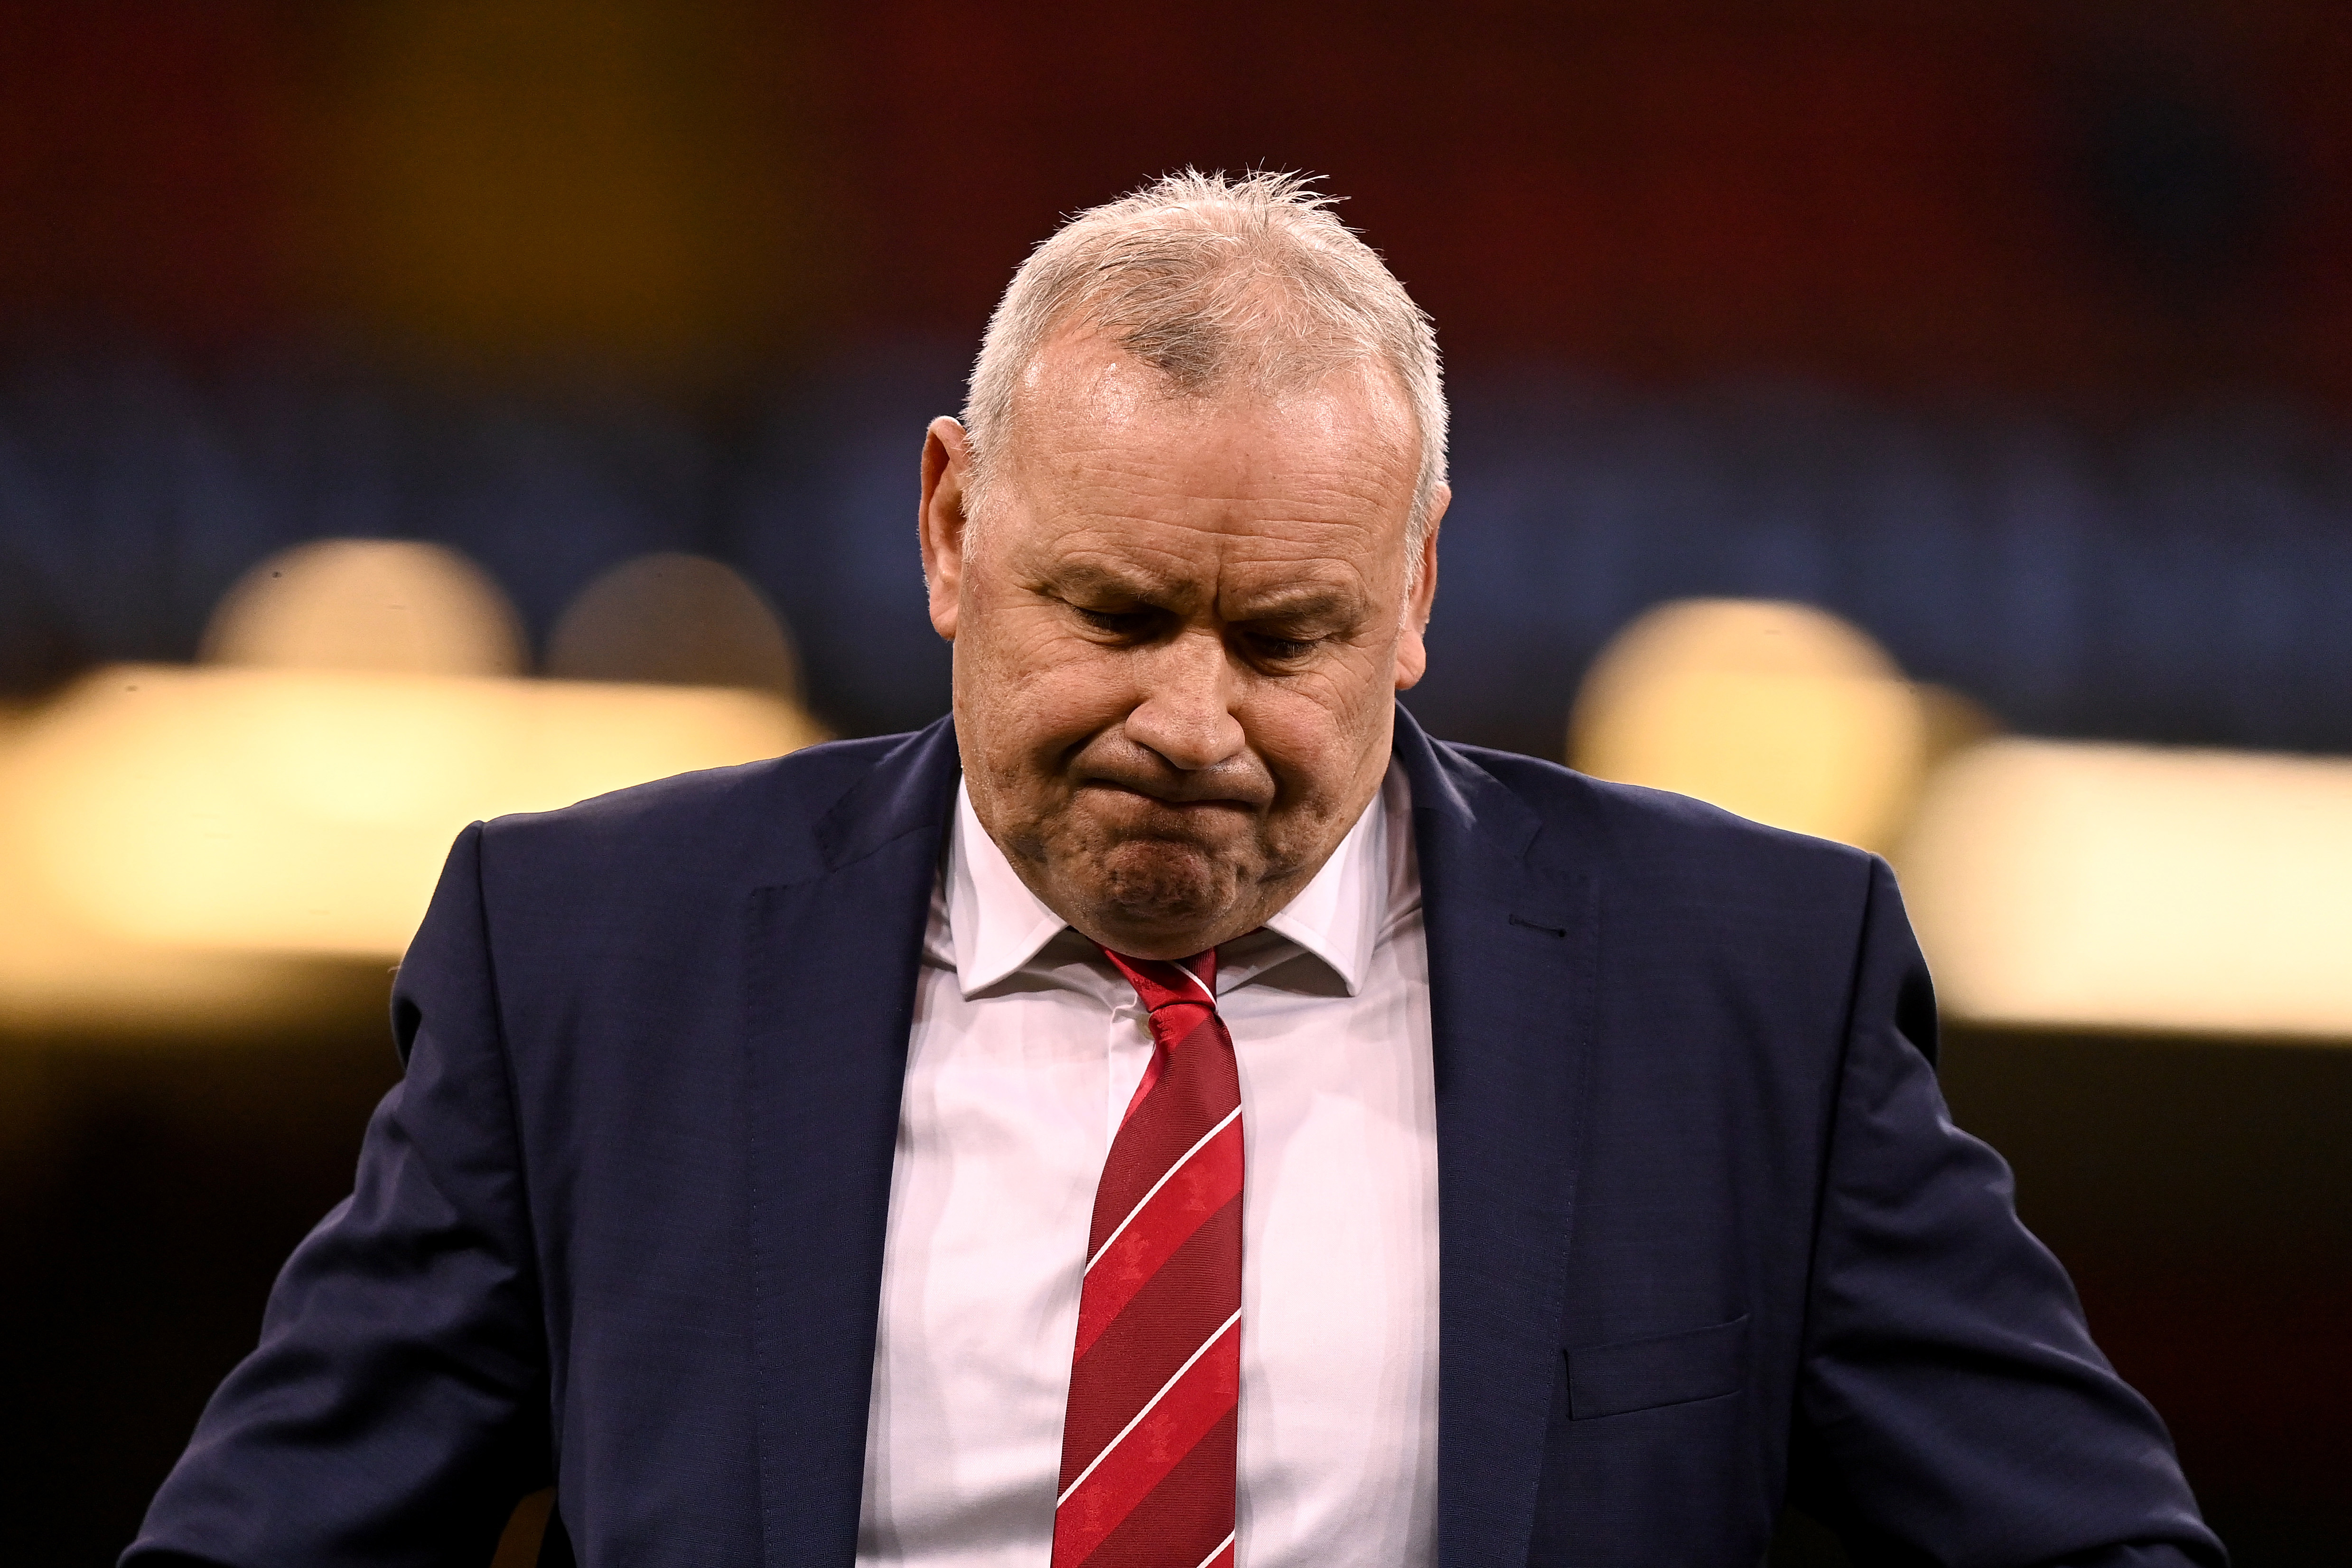 A dejected Wayne Pivac drops his head after Wales lose to Australia having led by 21 points.